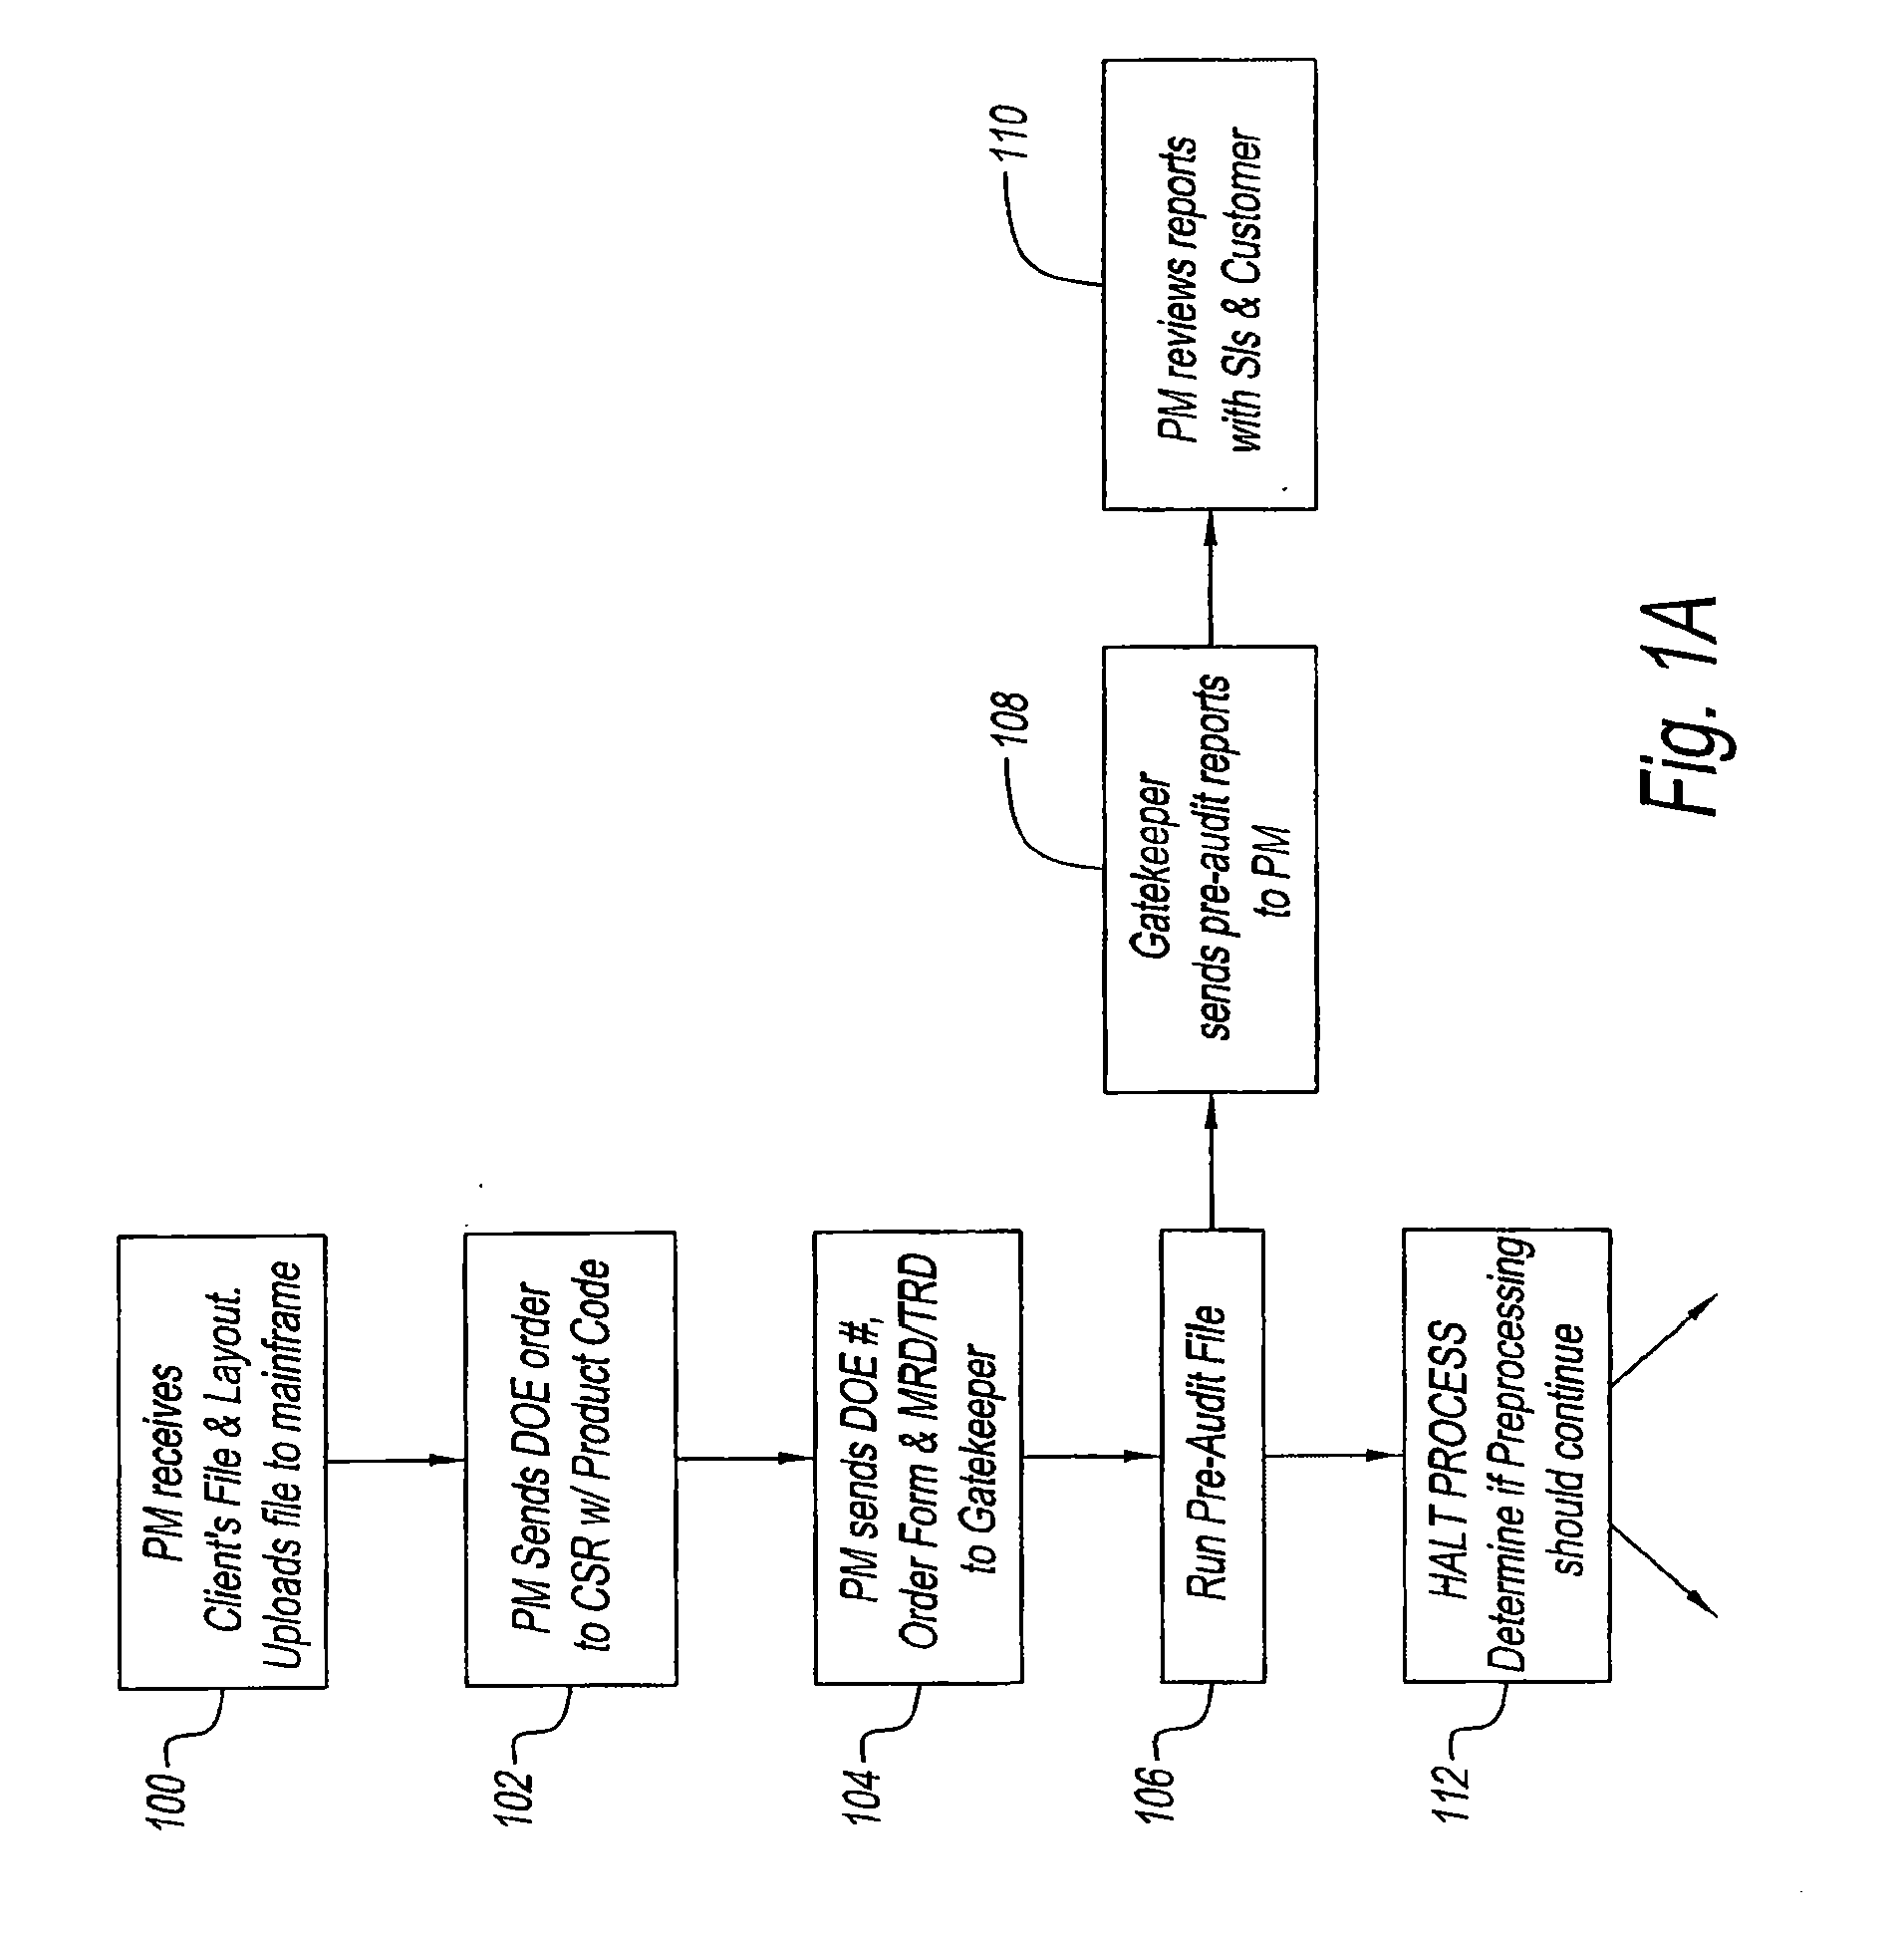 System and method for data cleansing